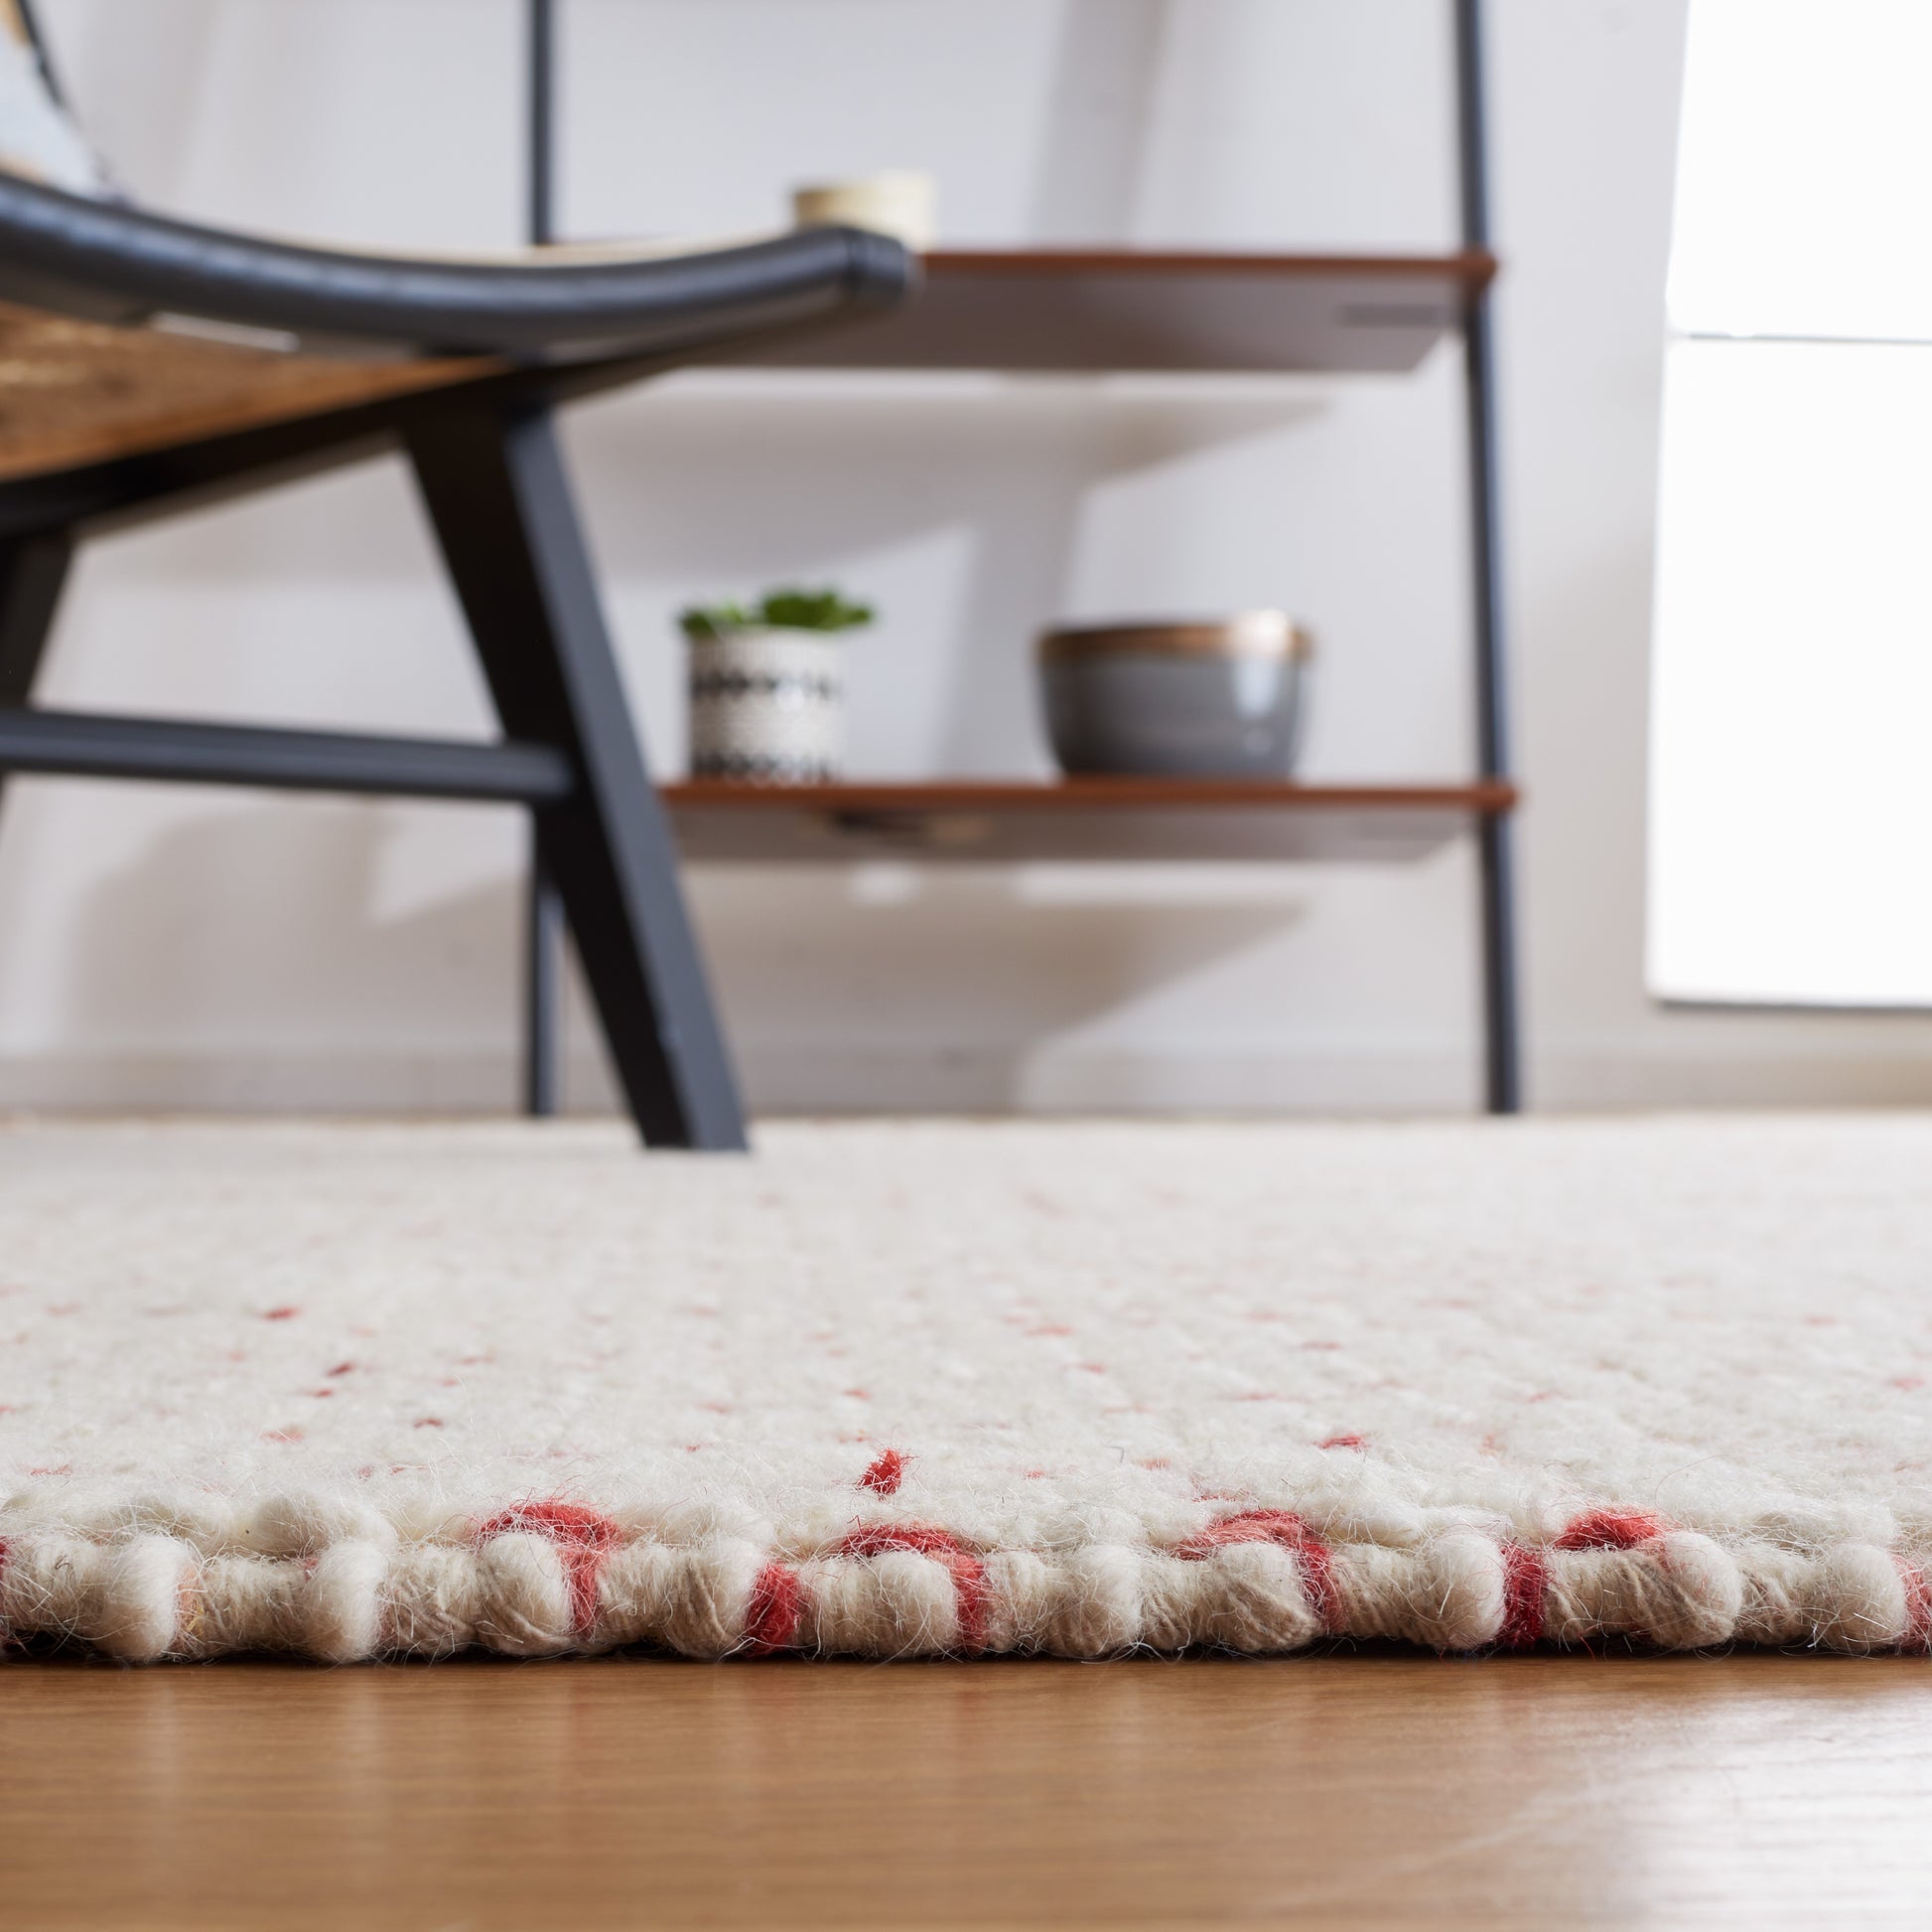 Safavieh Natura Nat184A Ivory/Red Area Rug